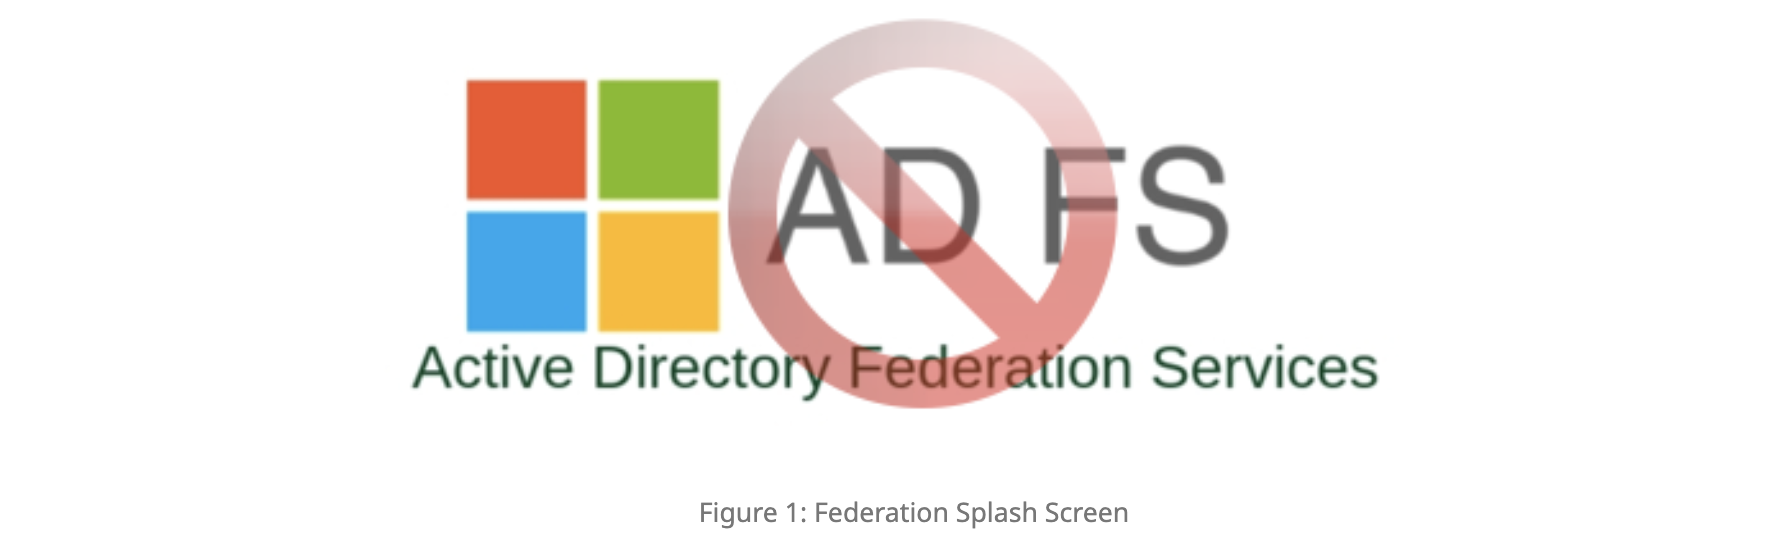 Want to switch off ADFS? Looking for some content?